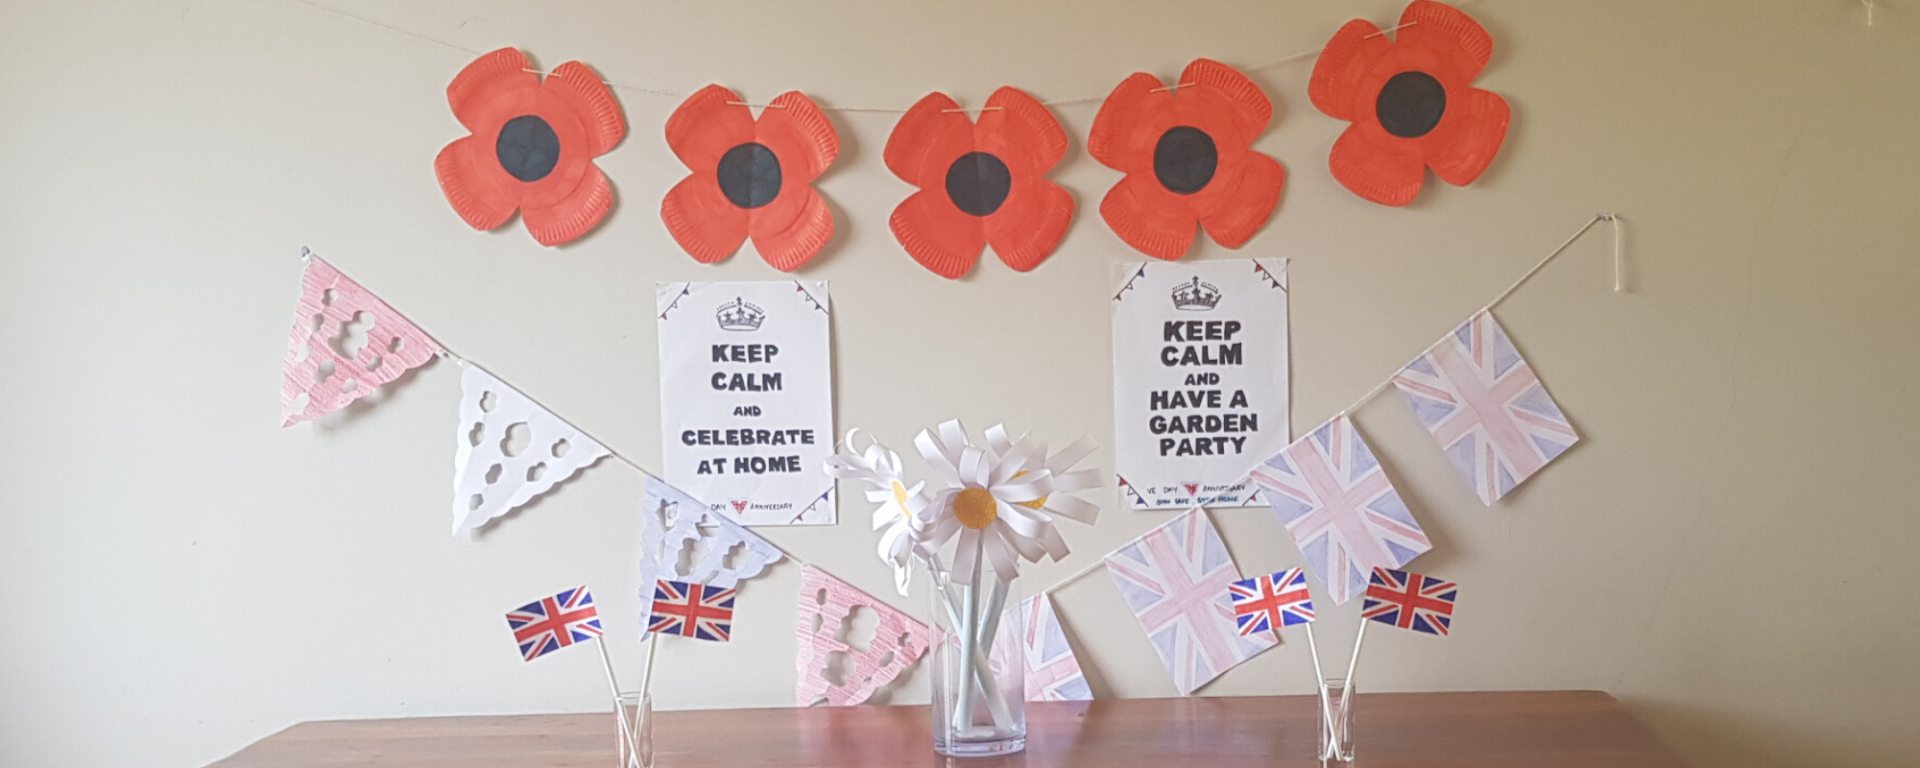 VE Day stay at home party decorations